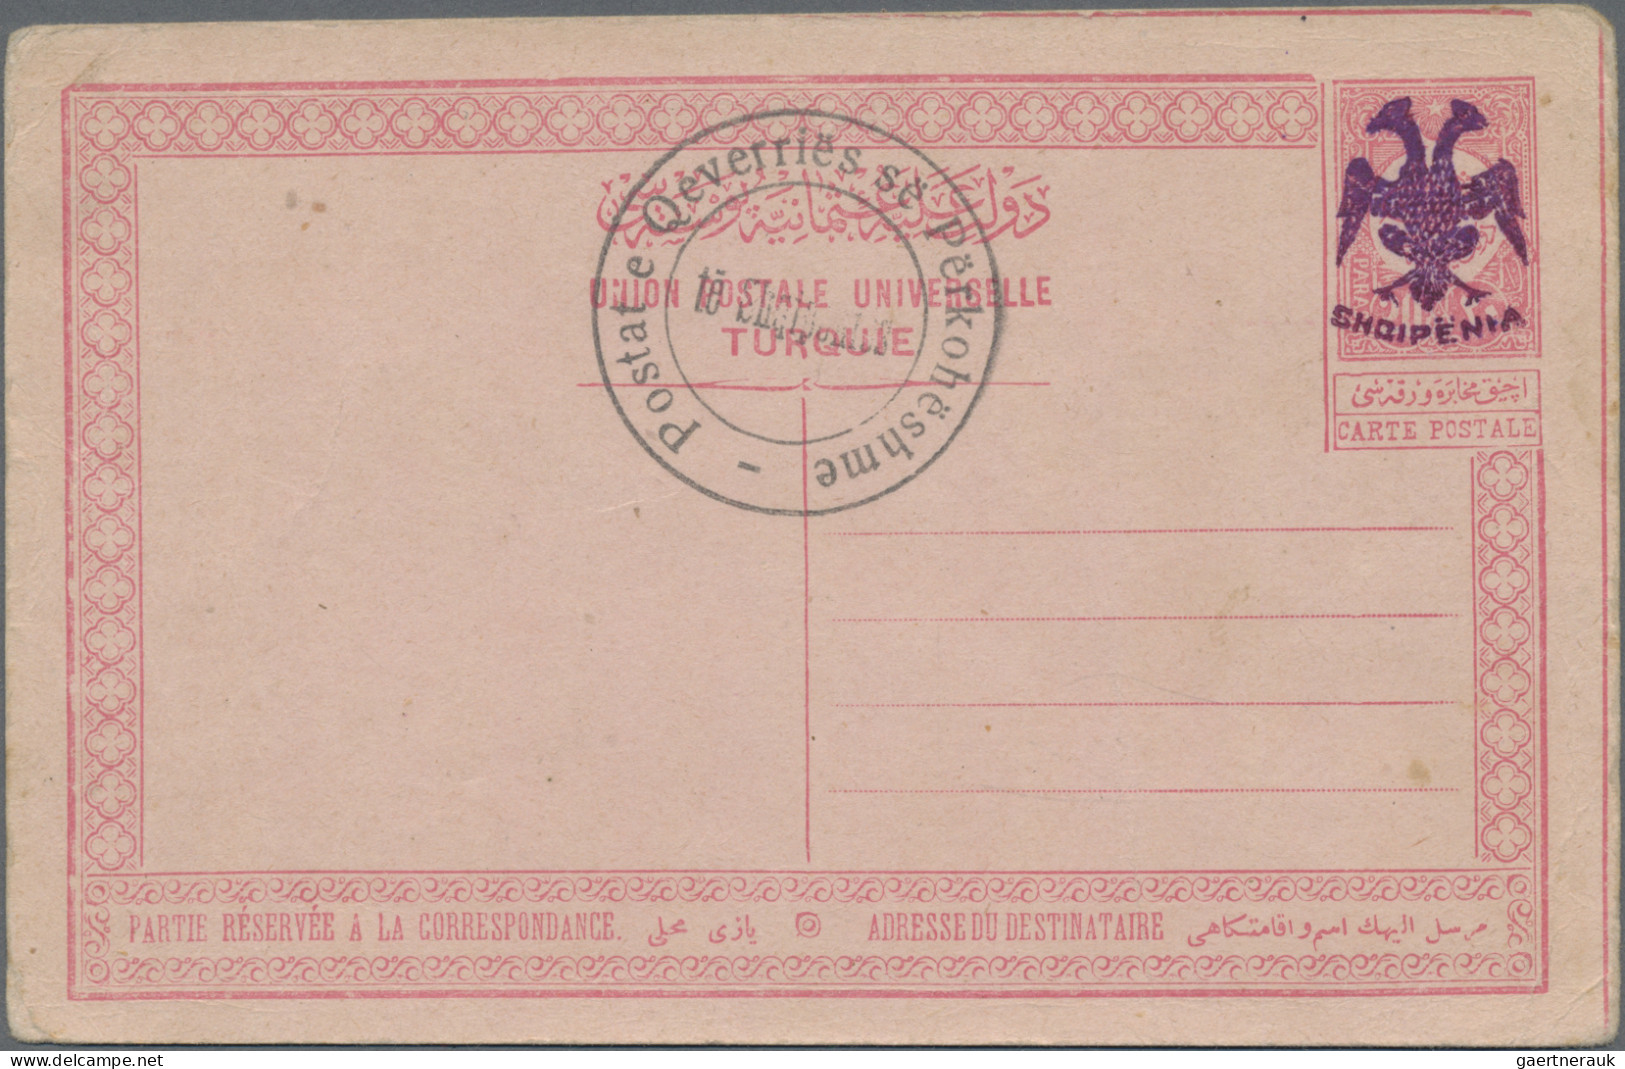 Albania - Postal Stationery: 1913, Two Turkisch Post Cards, One 20 Para Rose One - Albanië